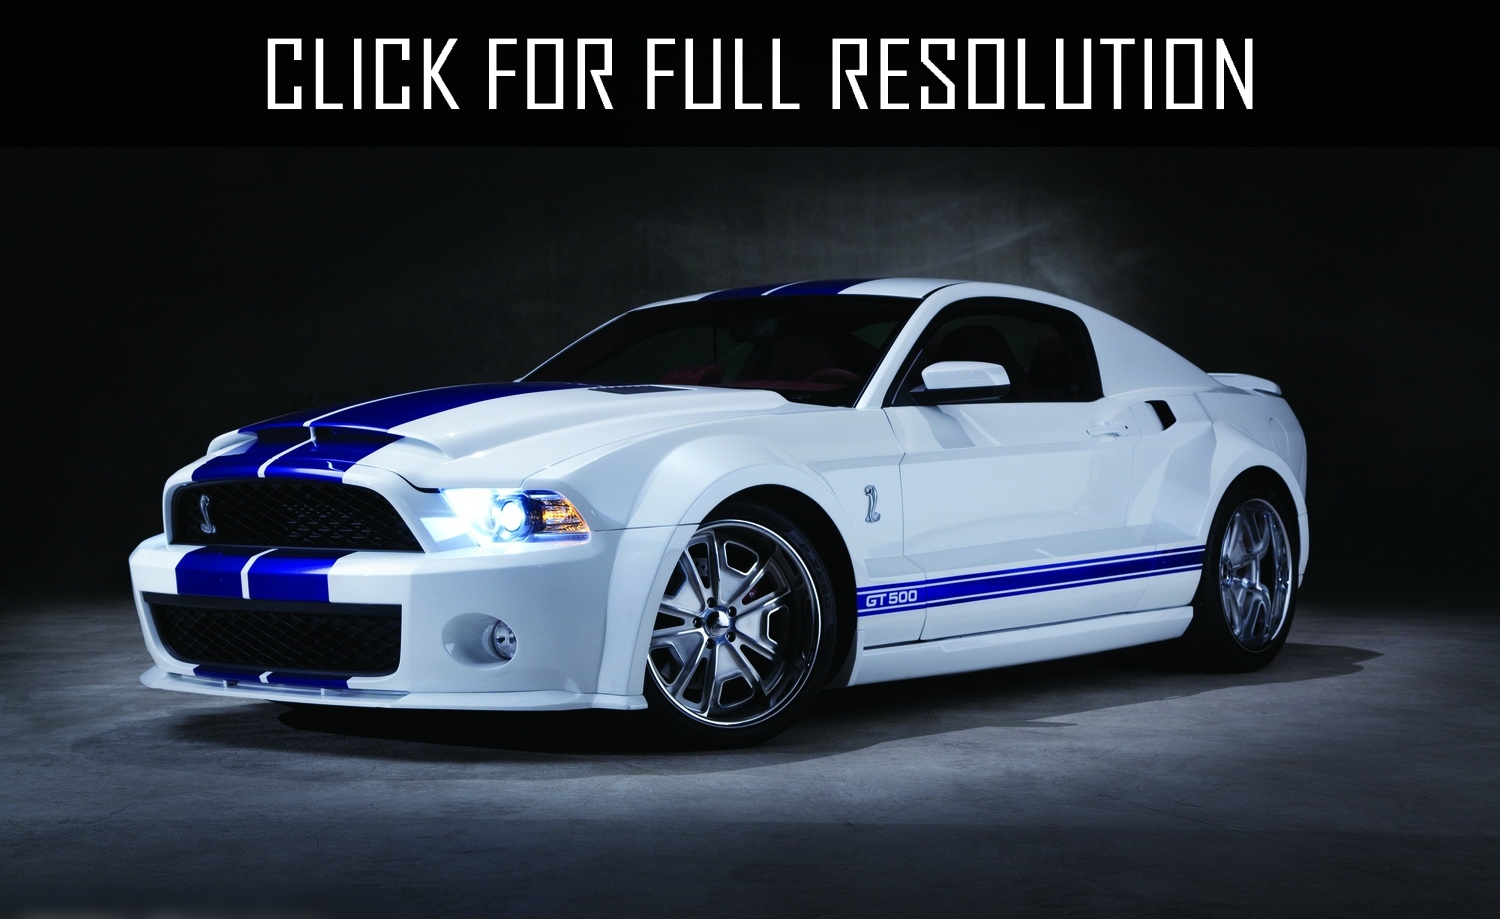 Ford Shelby Mustang 2015